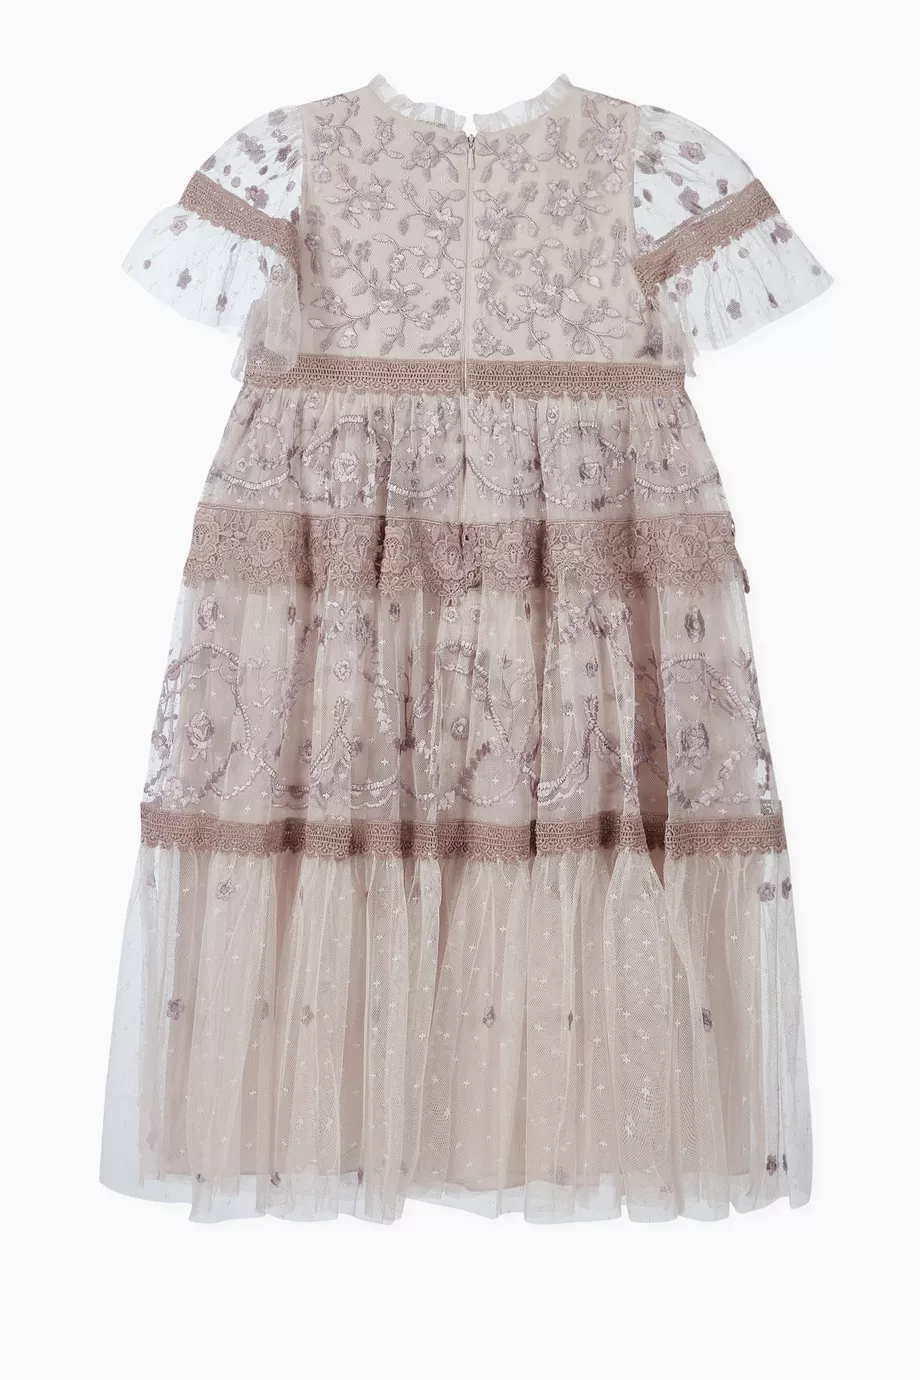 Young Girl Appliques Contrast Guipure Lace Mesh Hem Dress in Madina -  Children's Clothing, Vashwel Welbeck